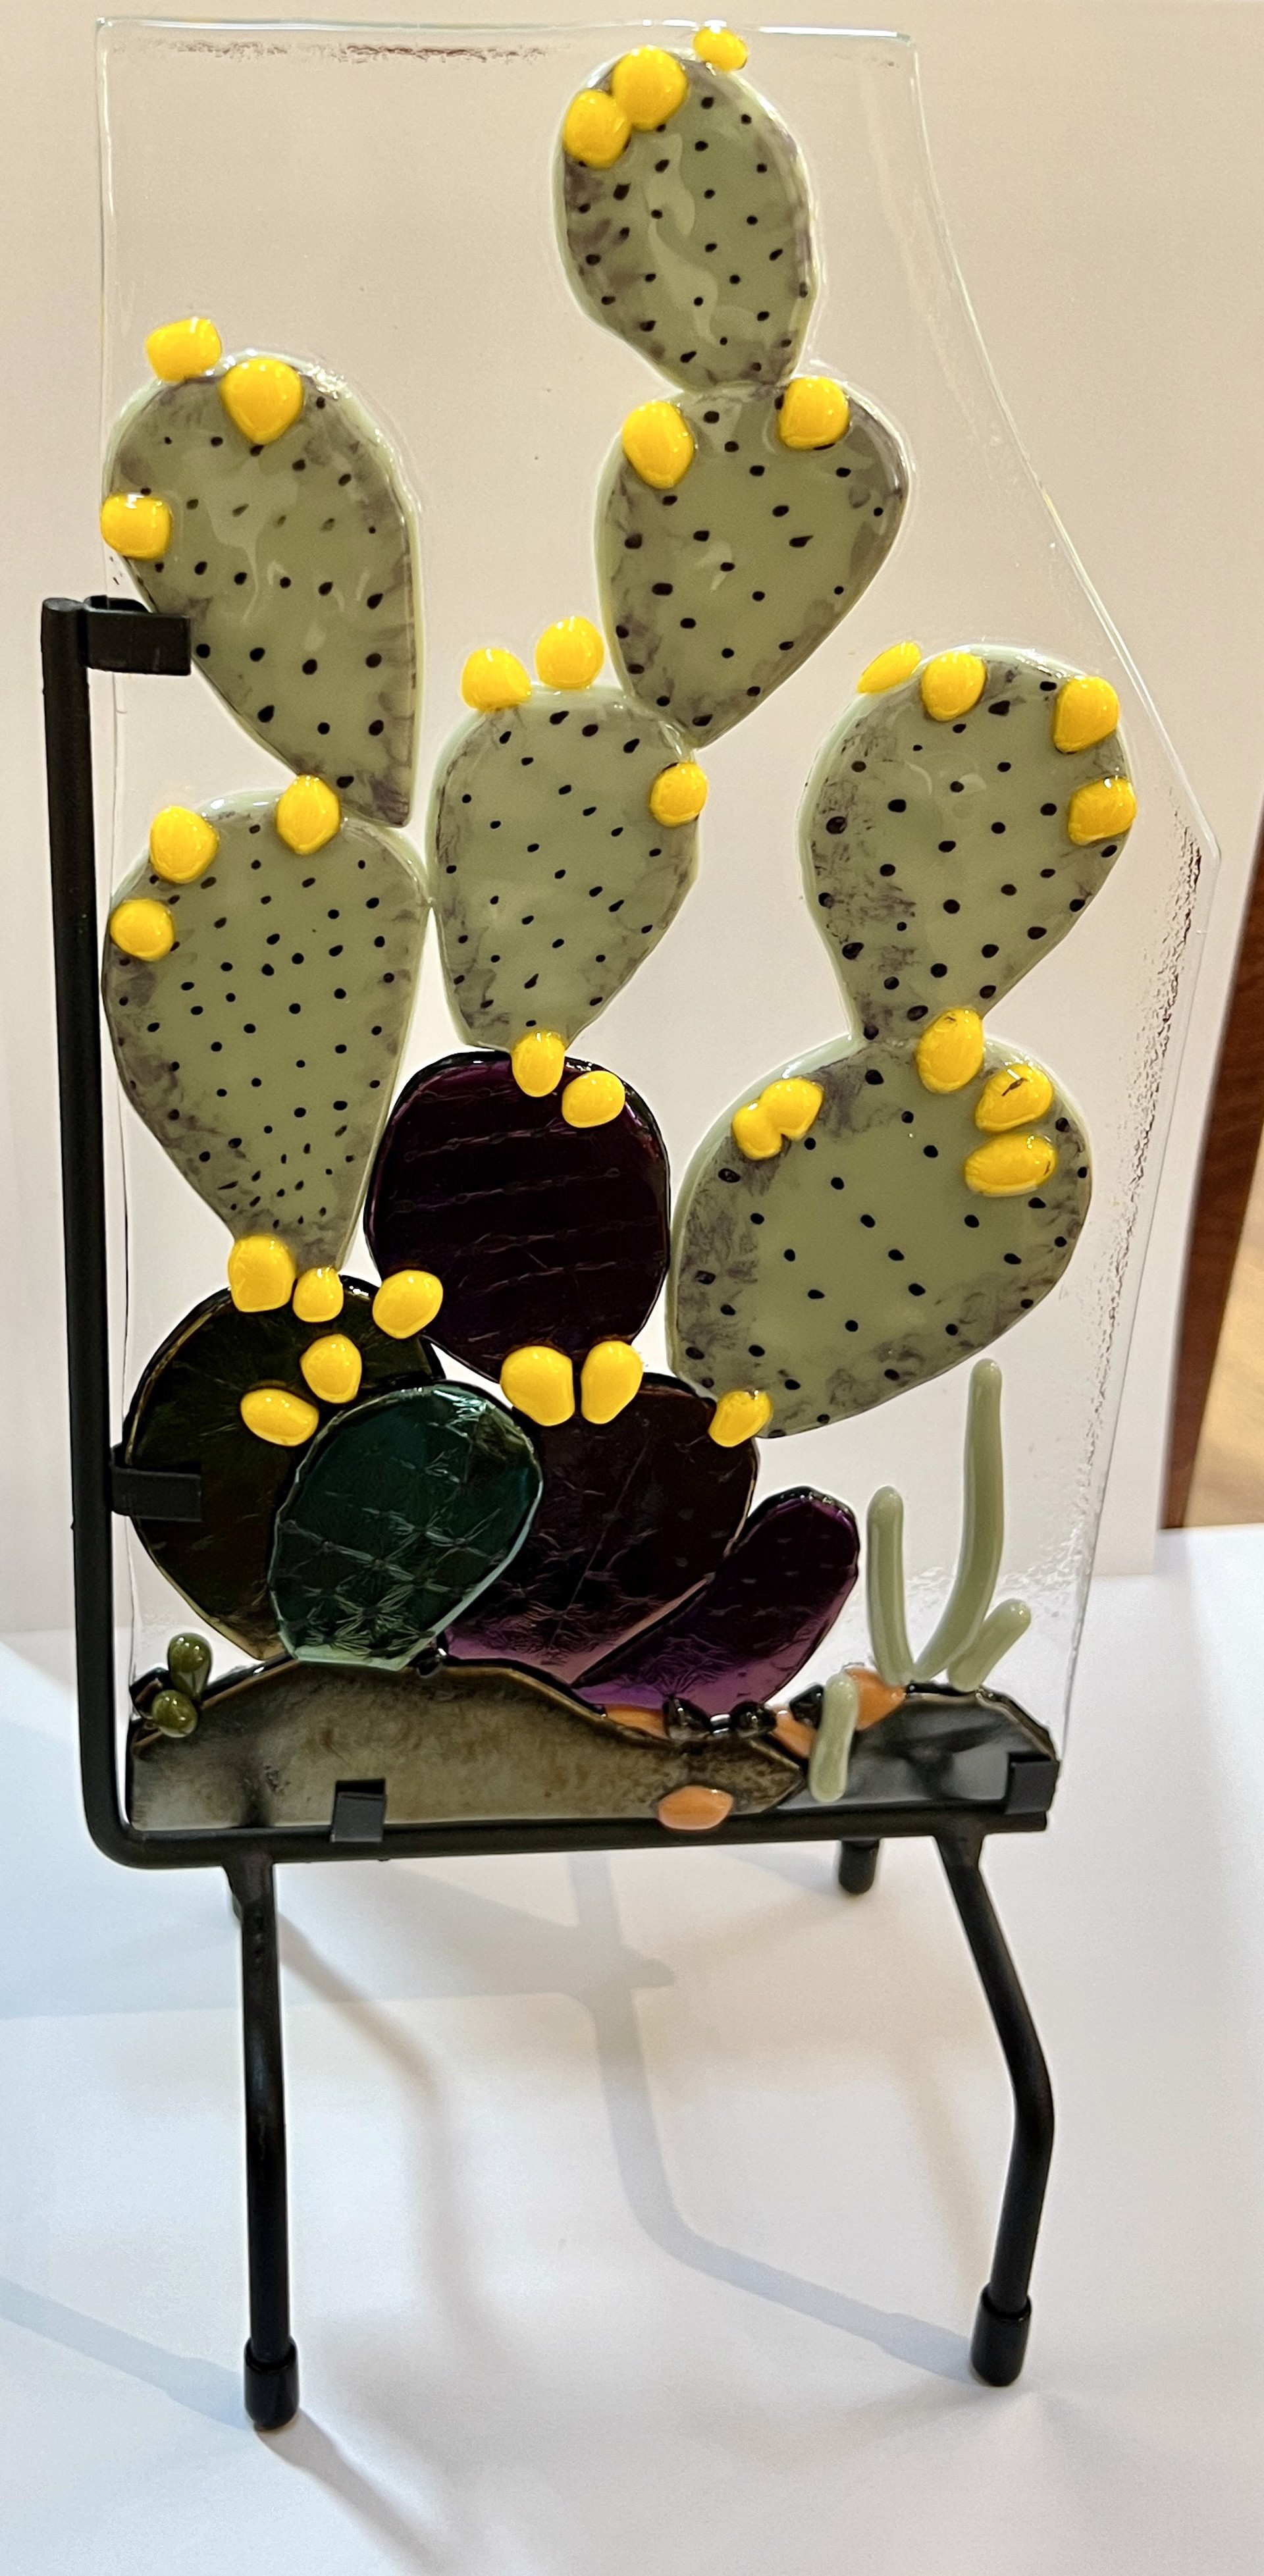 Proud Prickly Pear by Jean Gillis